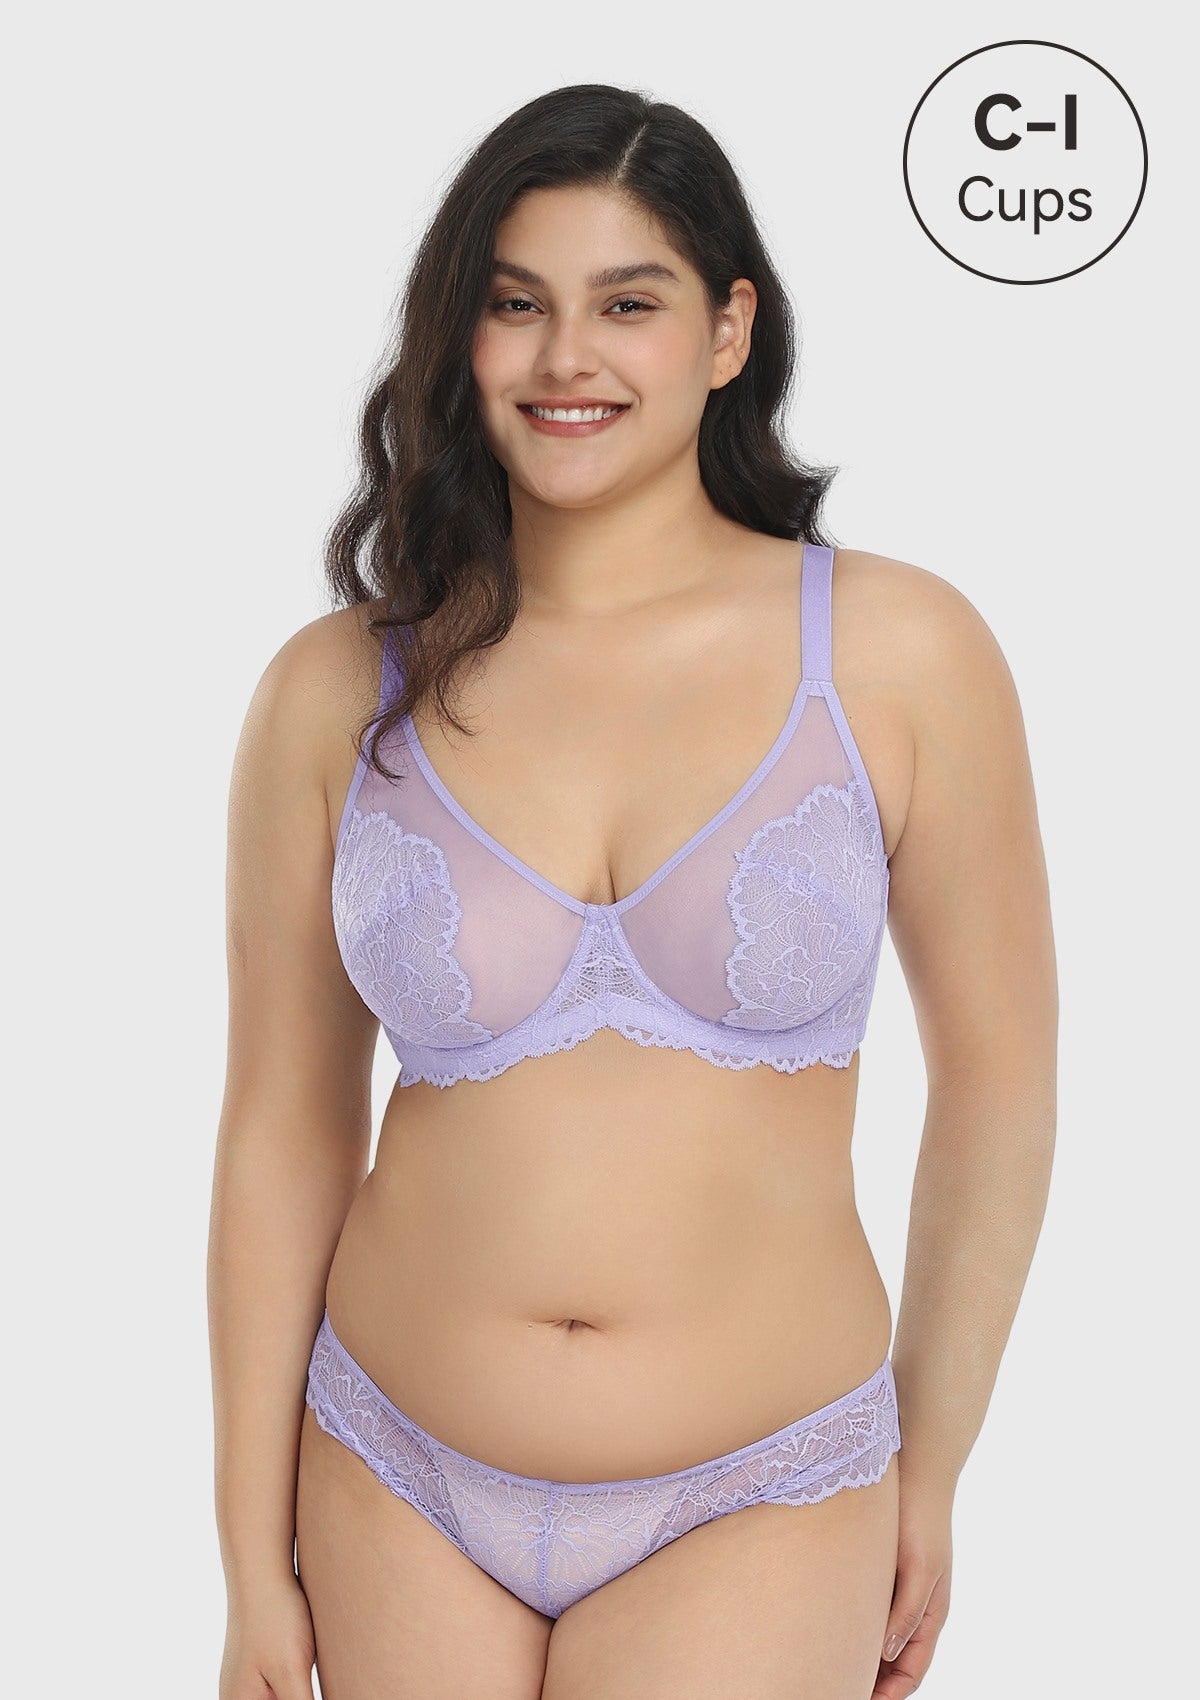 HSIA Blossom Transparent Lace Bra: Plus Size Wired Back Smoothing Bra - Light Purple / 42 / G